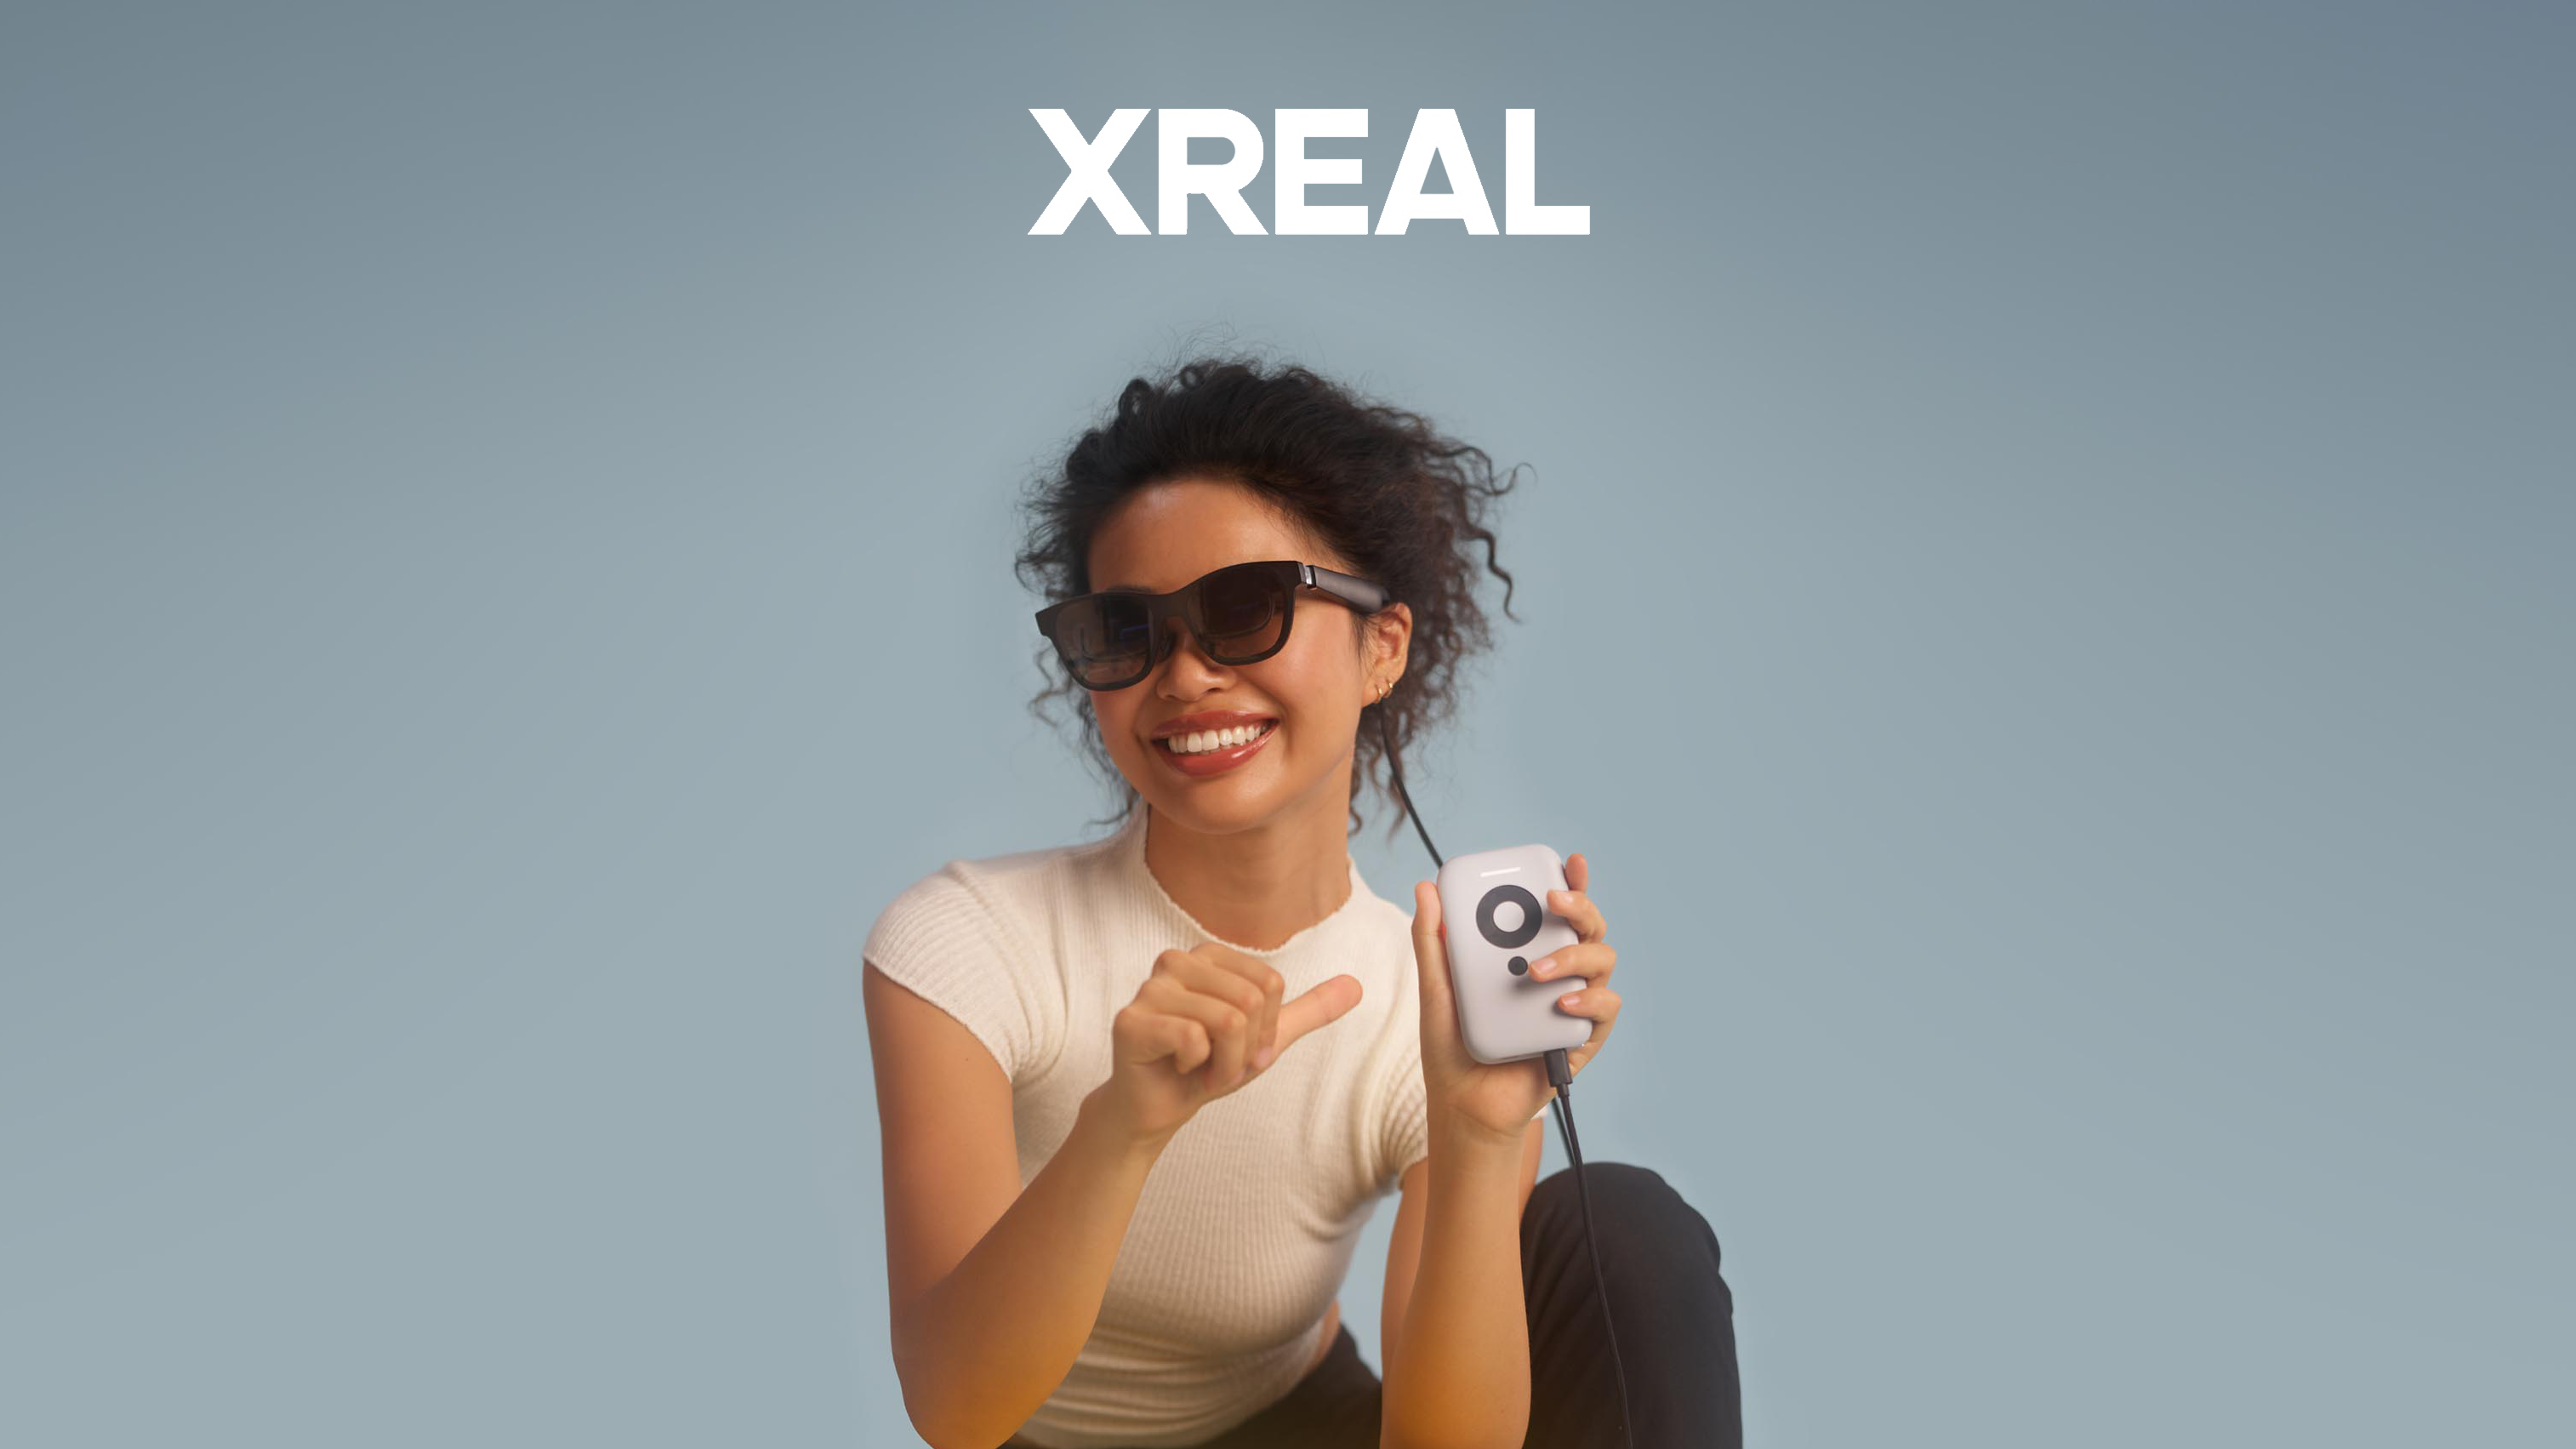 Nreal Rebrands To XREAL, Reveals iPhone & Consoles Adapter